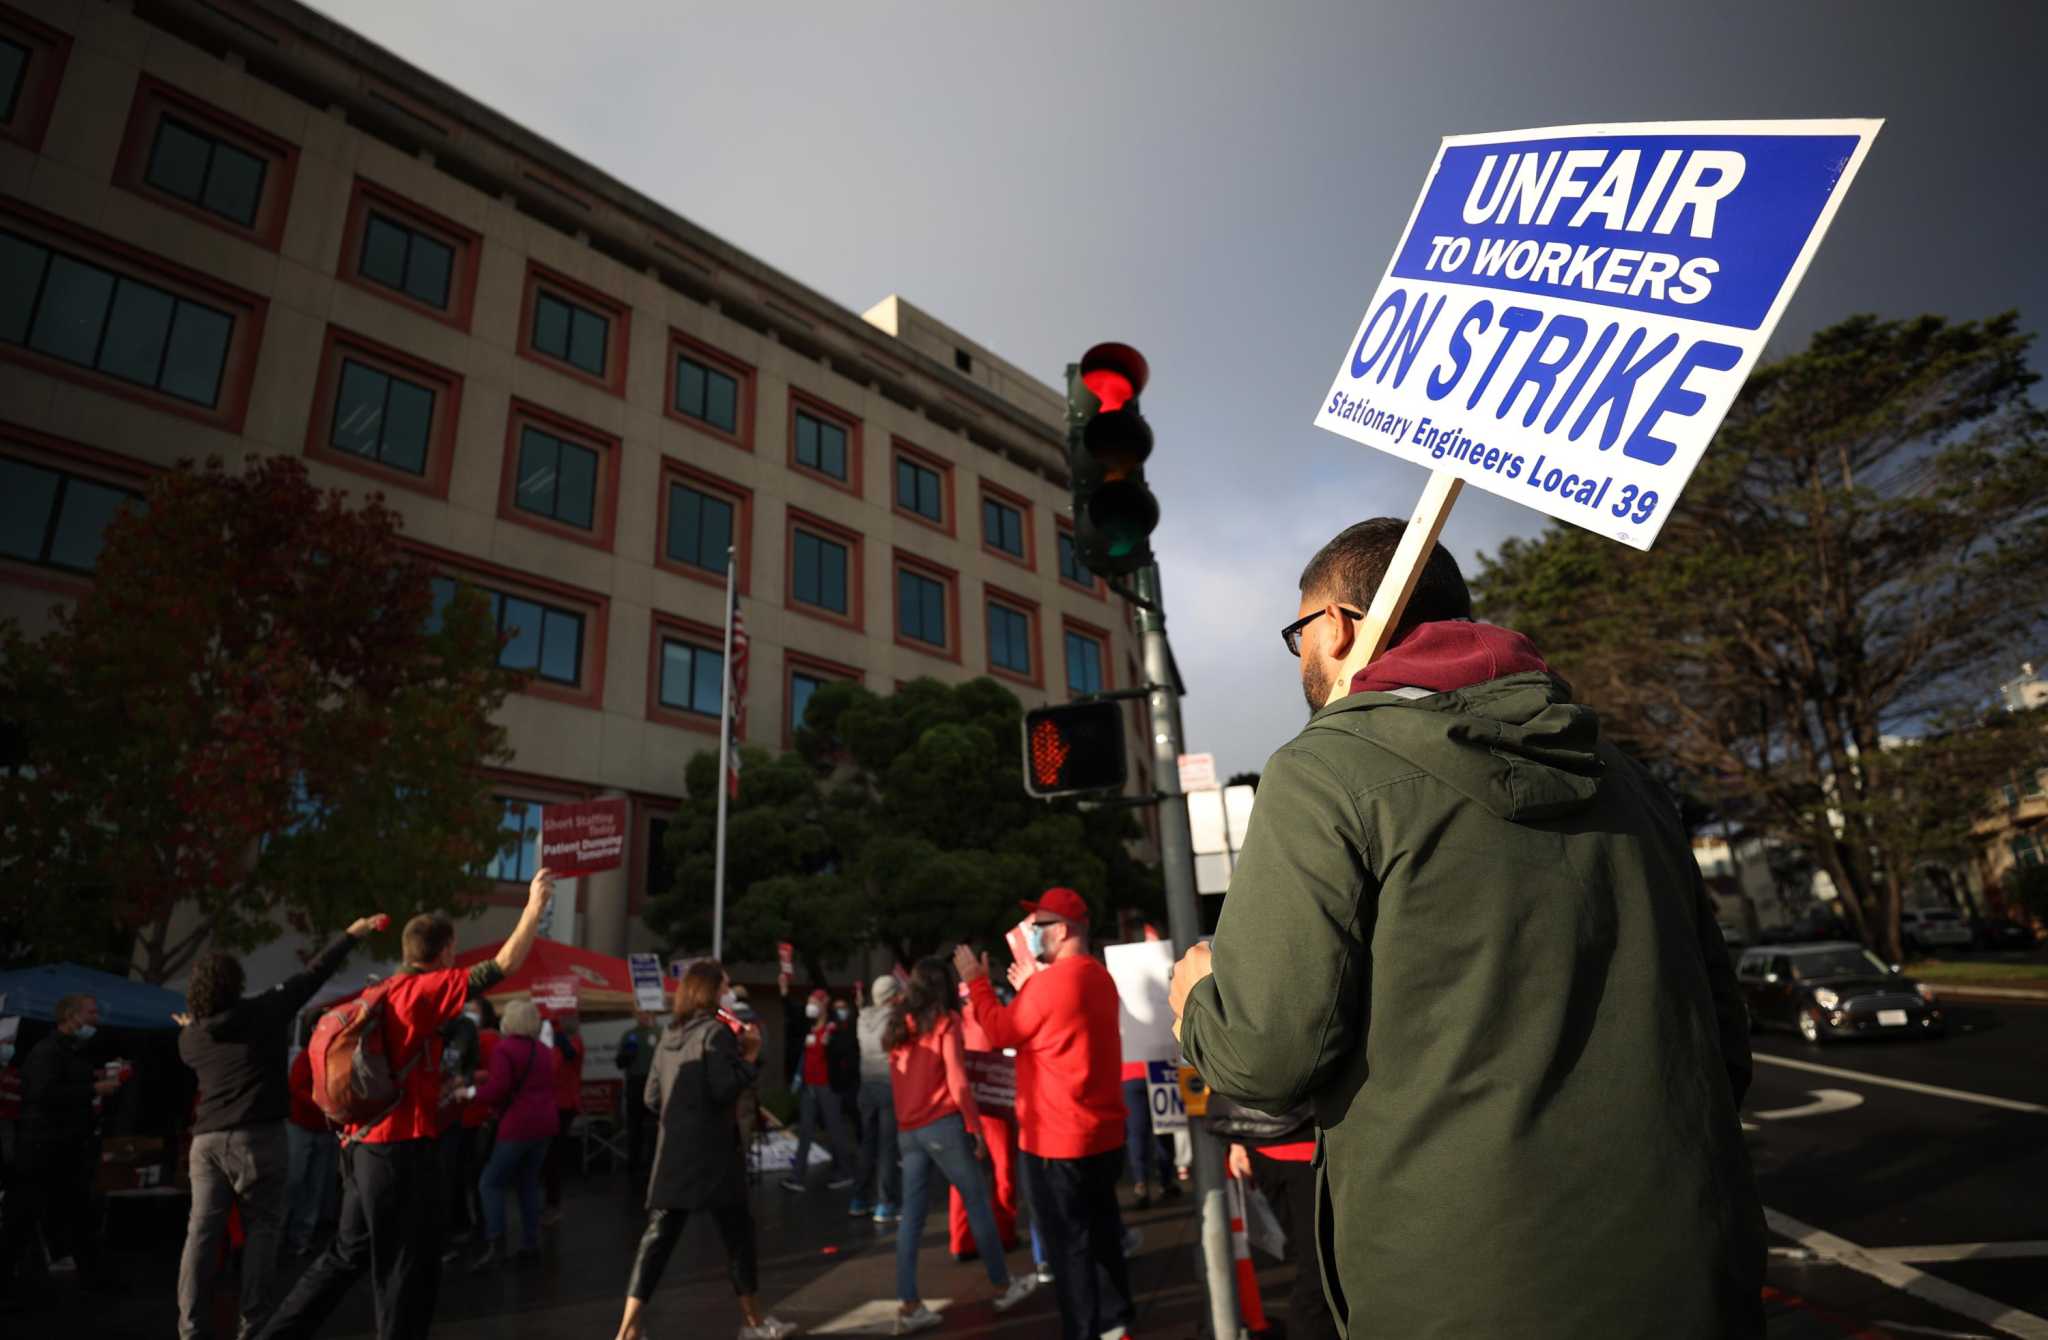 Kaiser union employees to hold sympathy strikes Thursday, Friday in